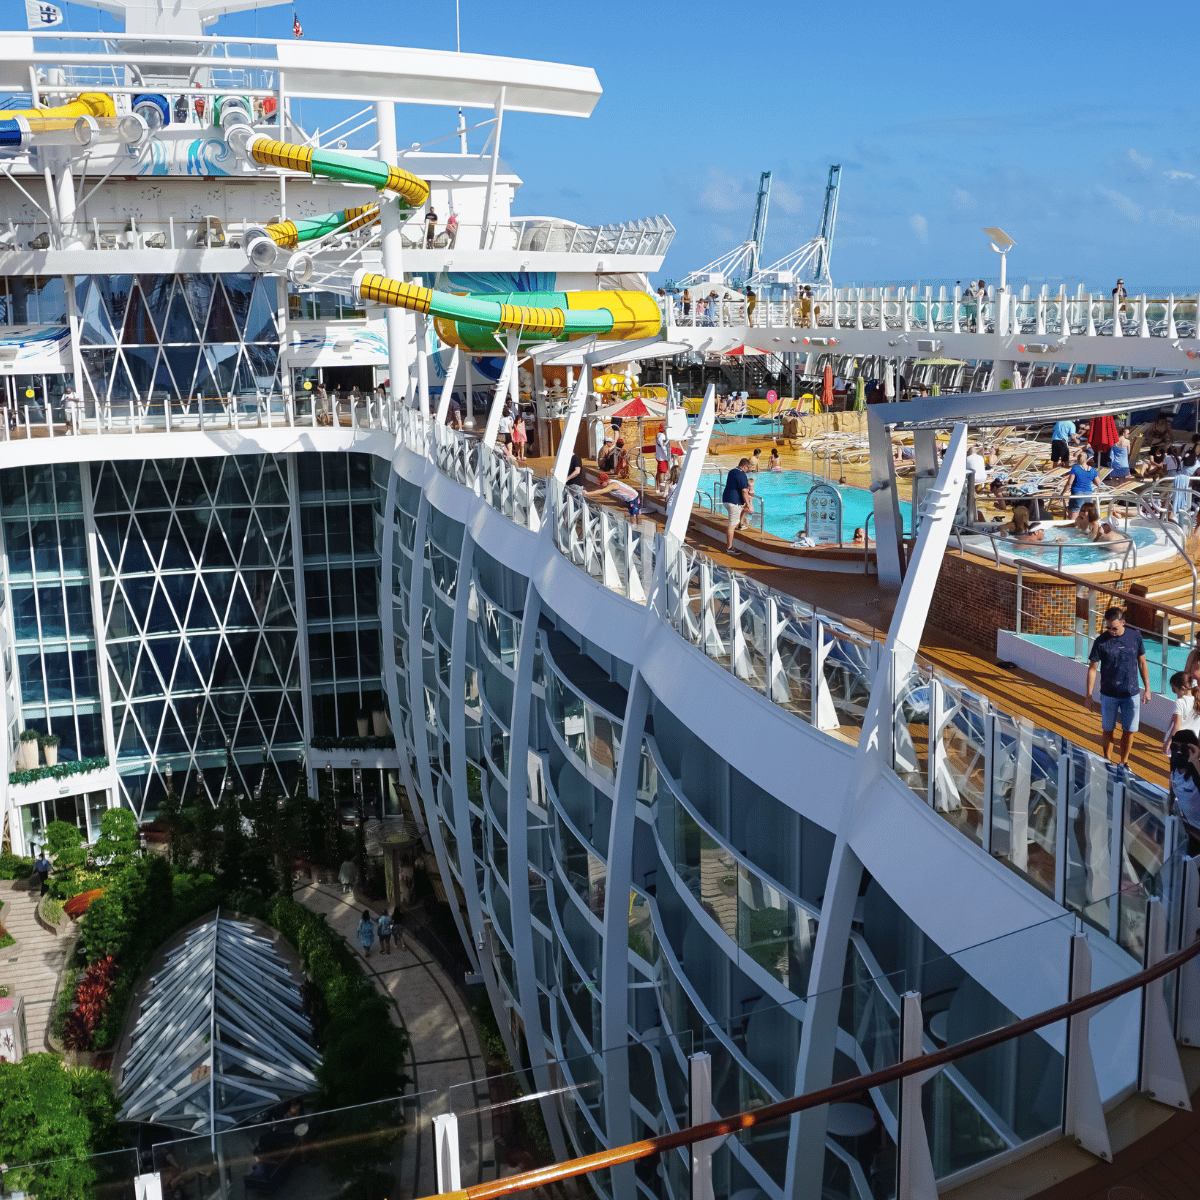 Miami, USA - April 29, 2022: People having fun at pools, bars, entertainment and innovative activities at Symphony of the seas is the biggest cruise ship at Miami, USA on April 29, 2022